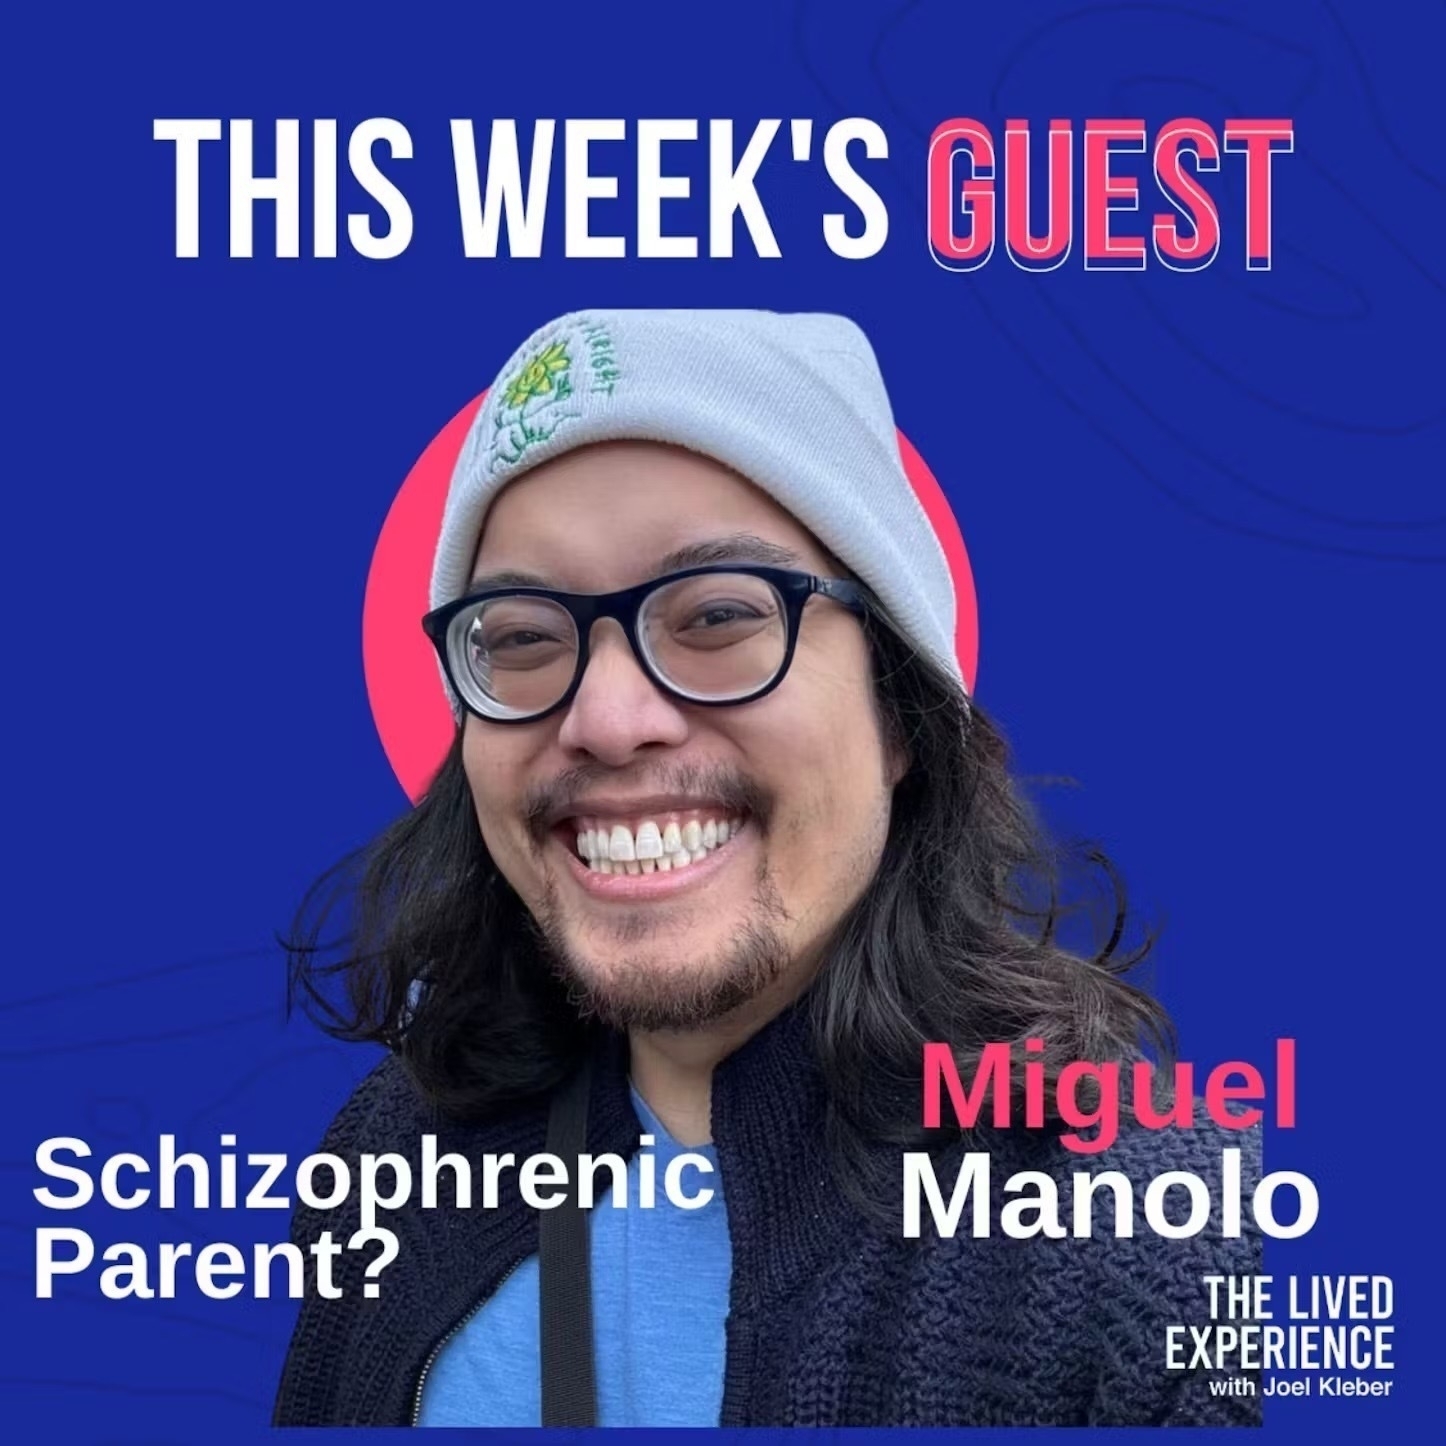  A headshot of Miguel Manalo, a young man with long dark hair, glasses, and a beanie. He is smiling and has a caption that reads "This week's guest: Miguel Manolo. Schizophrenic parent?"